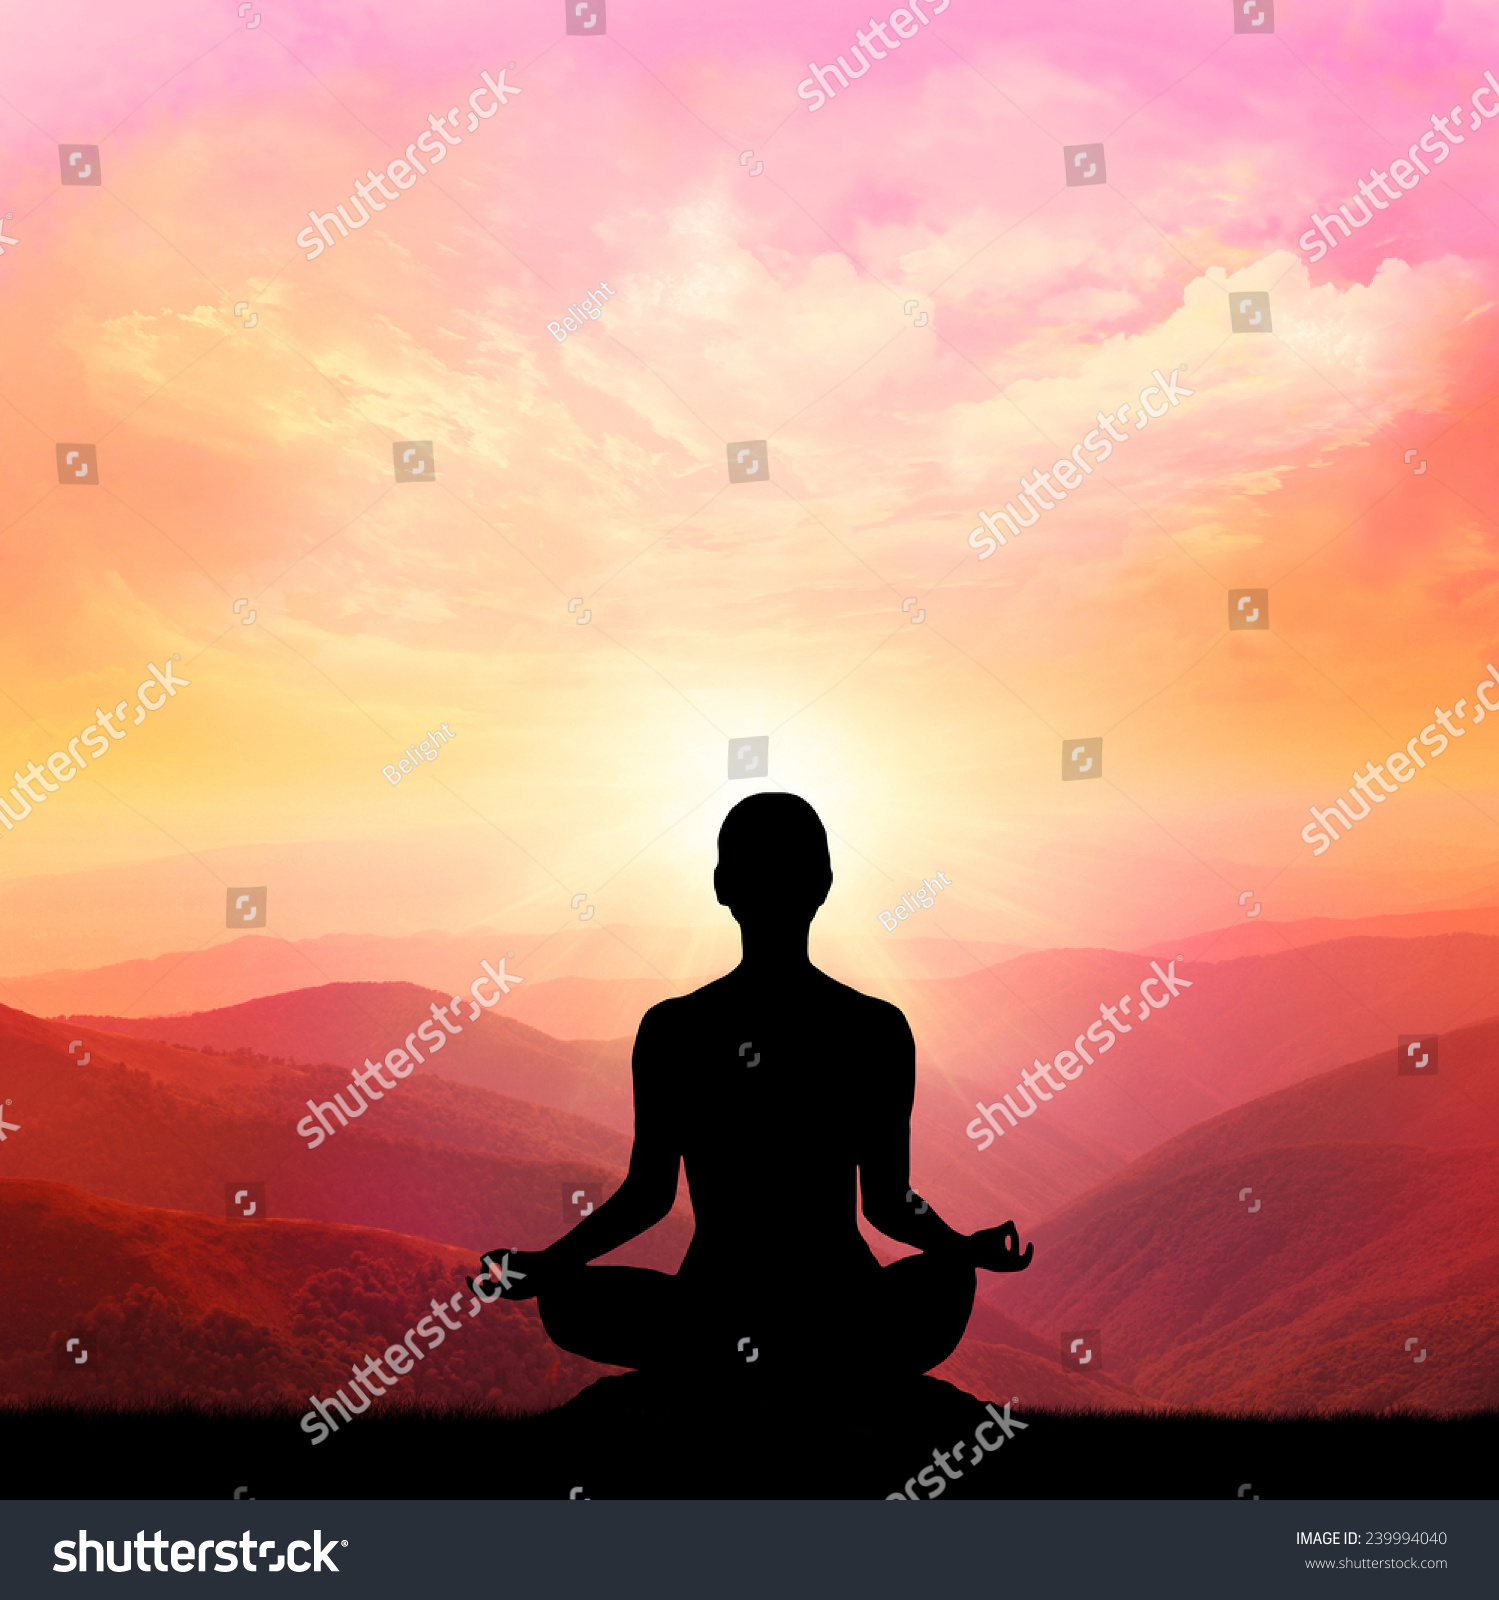 Yoga silhouette on the mountain in the rays of the dawn sun #239994040